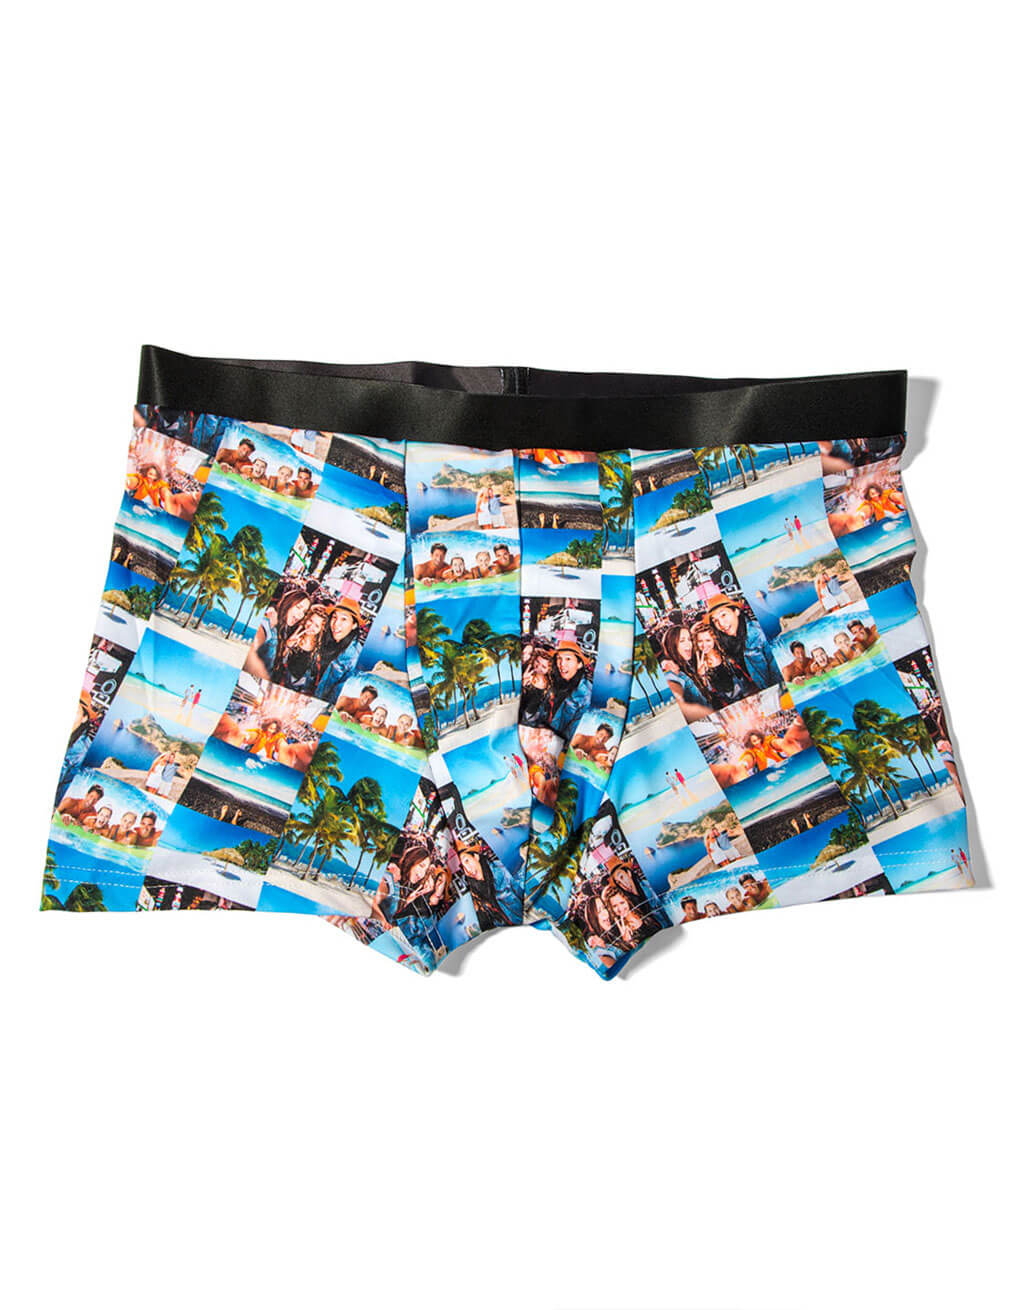 Custom All Over Print Faces Mash Men's Face Boxer Personalized